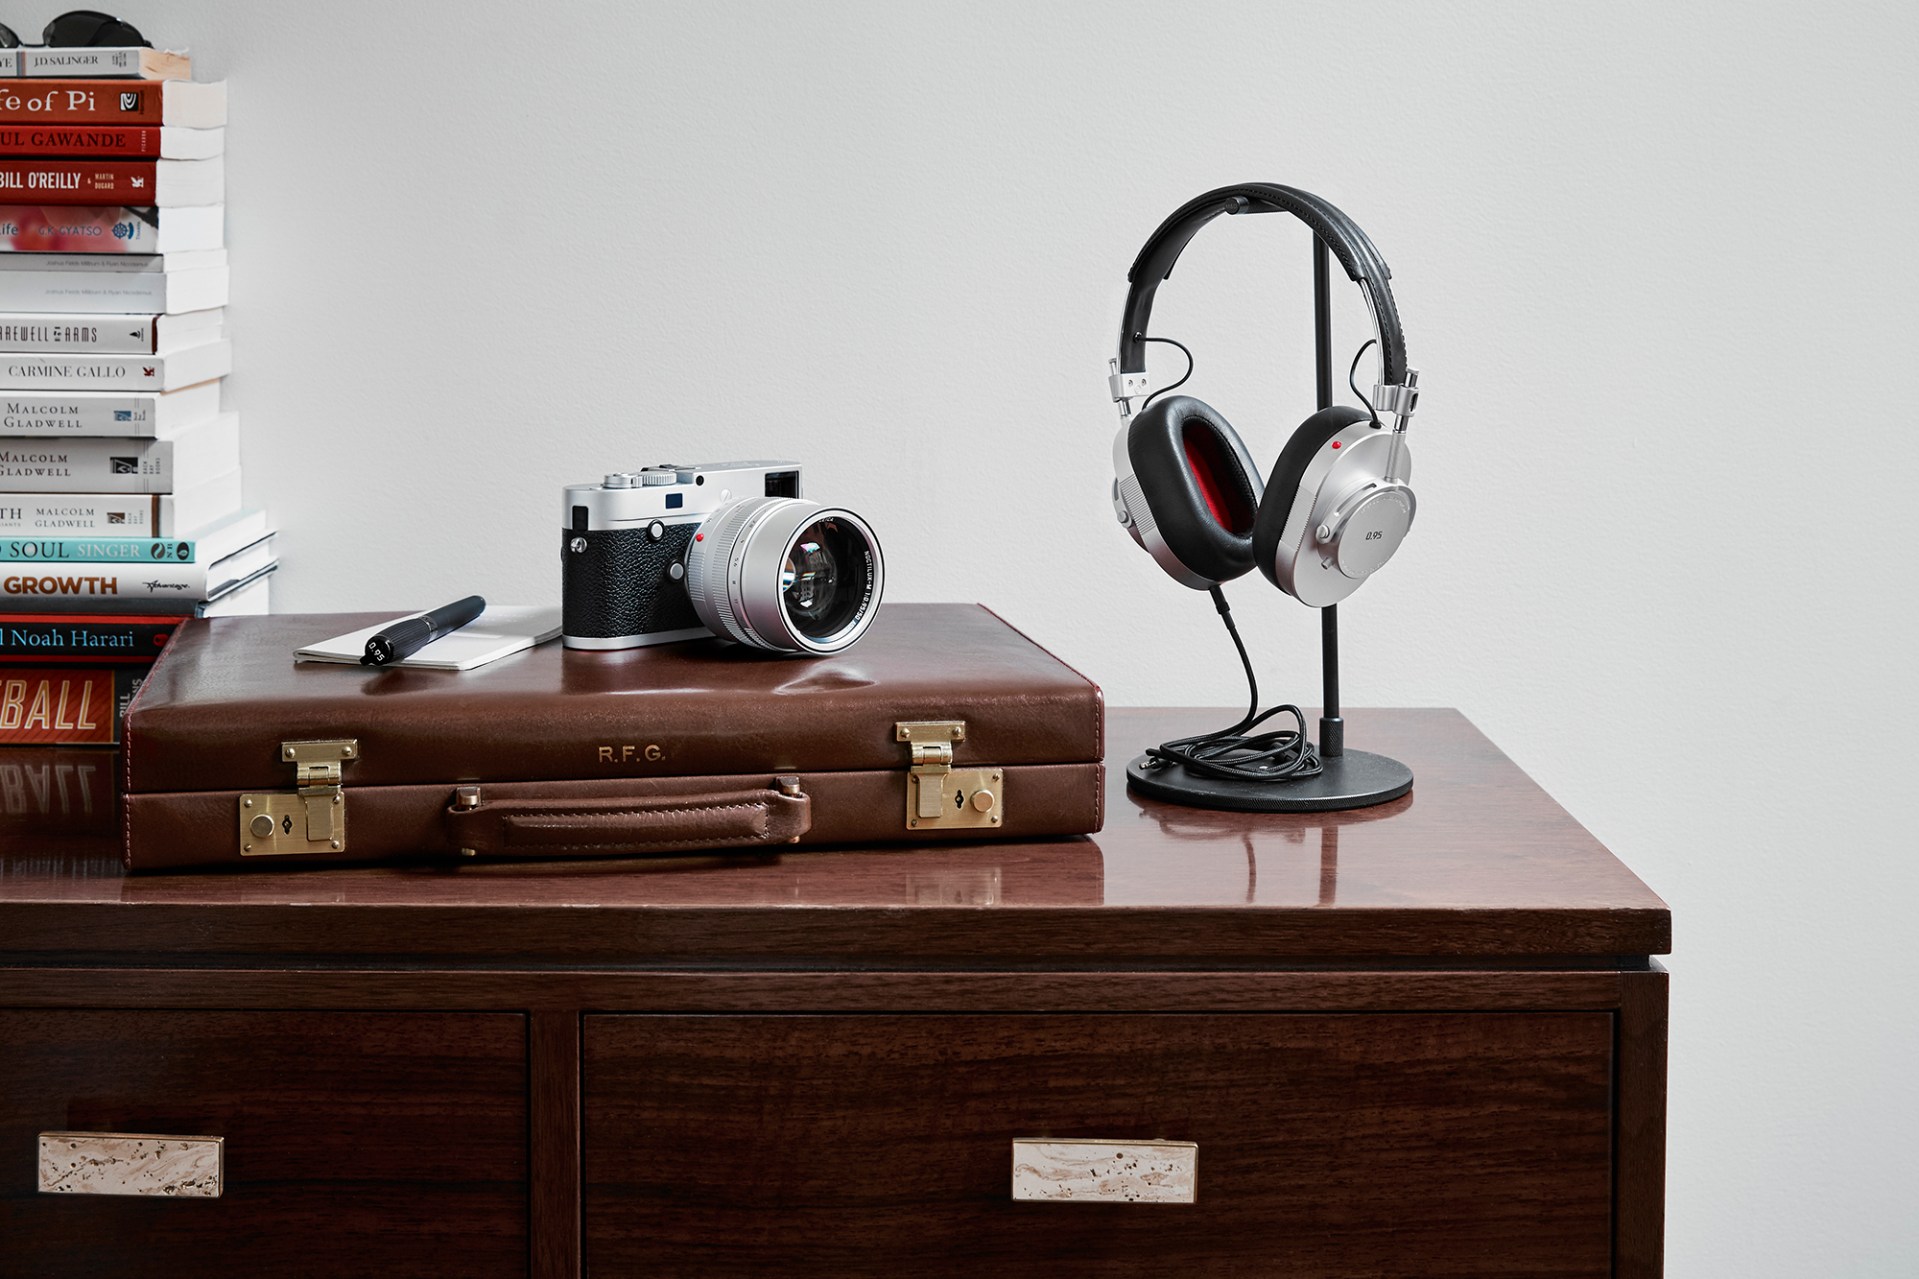 MH40 Over-Ear Headphones for 0.95 Silver Edition